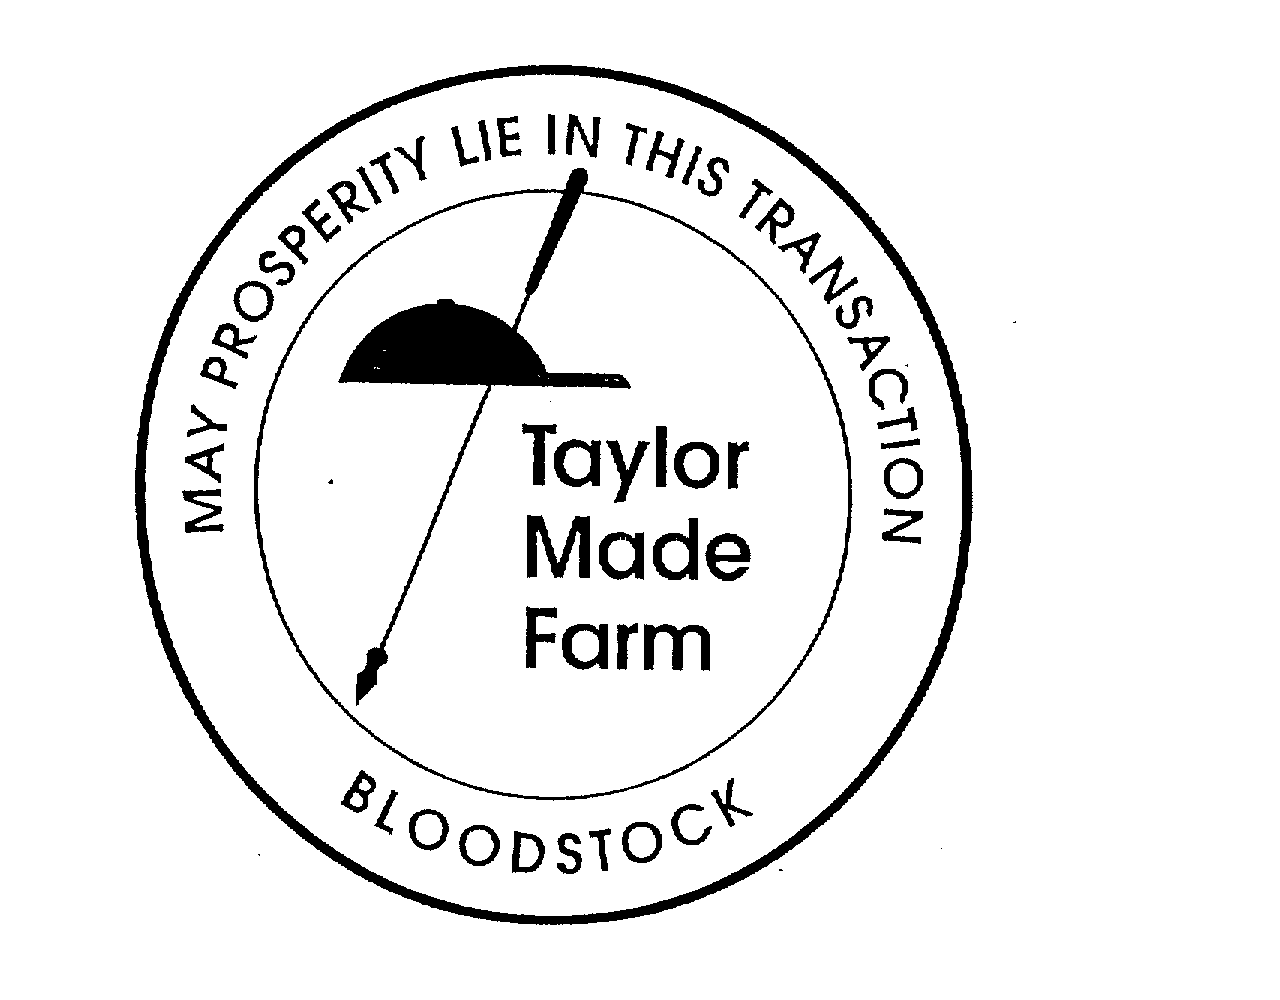  TAYLOR MADE FARM BLOODSTOCK MAY PROSPERITY LIE IN THIS TRANSACTION